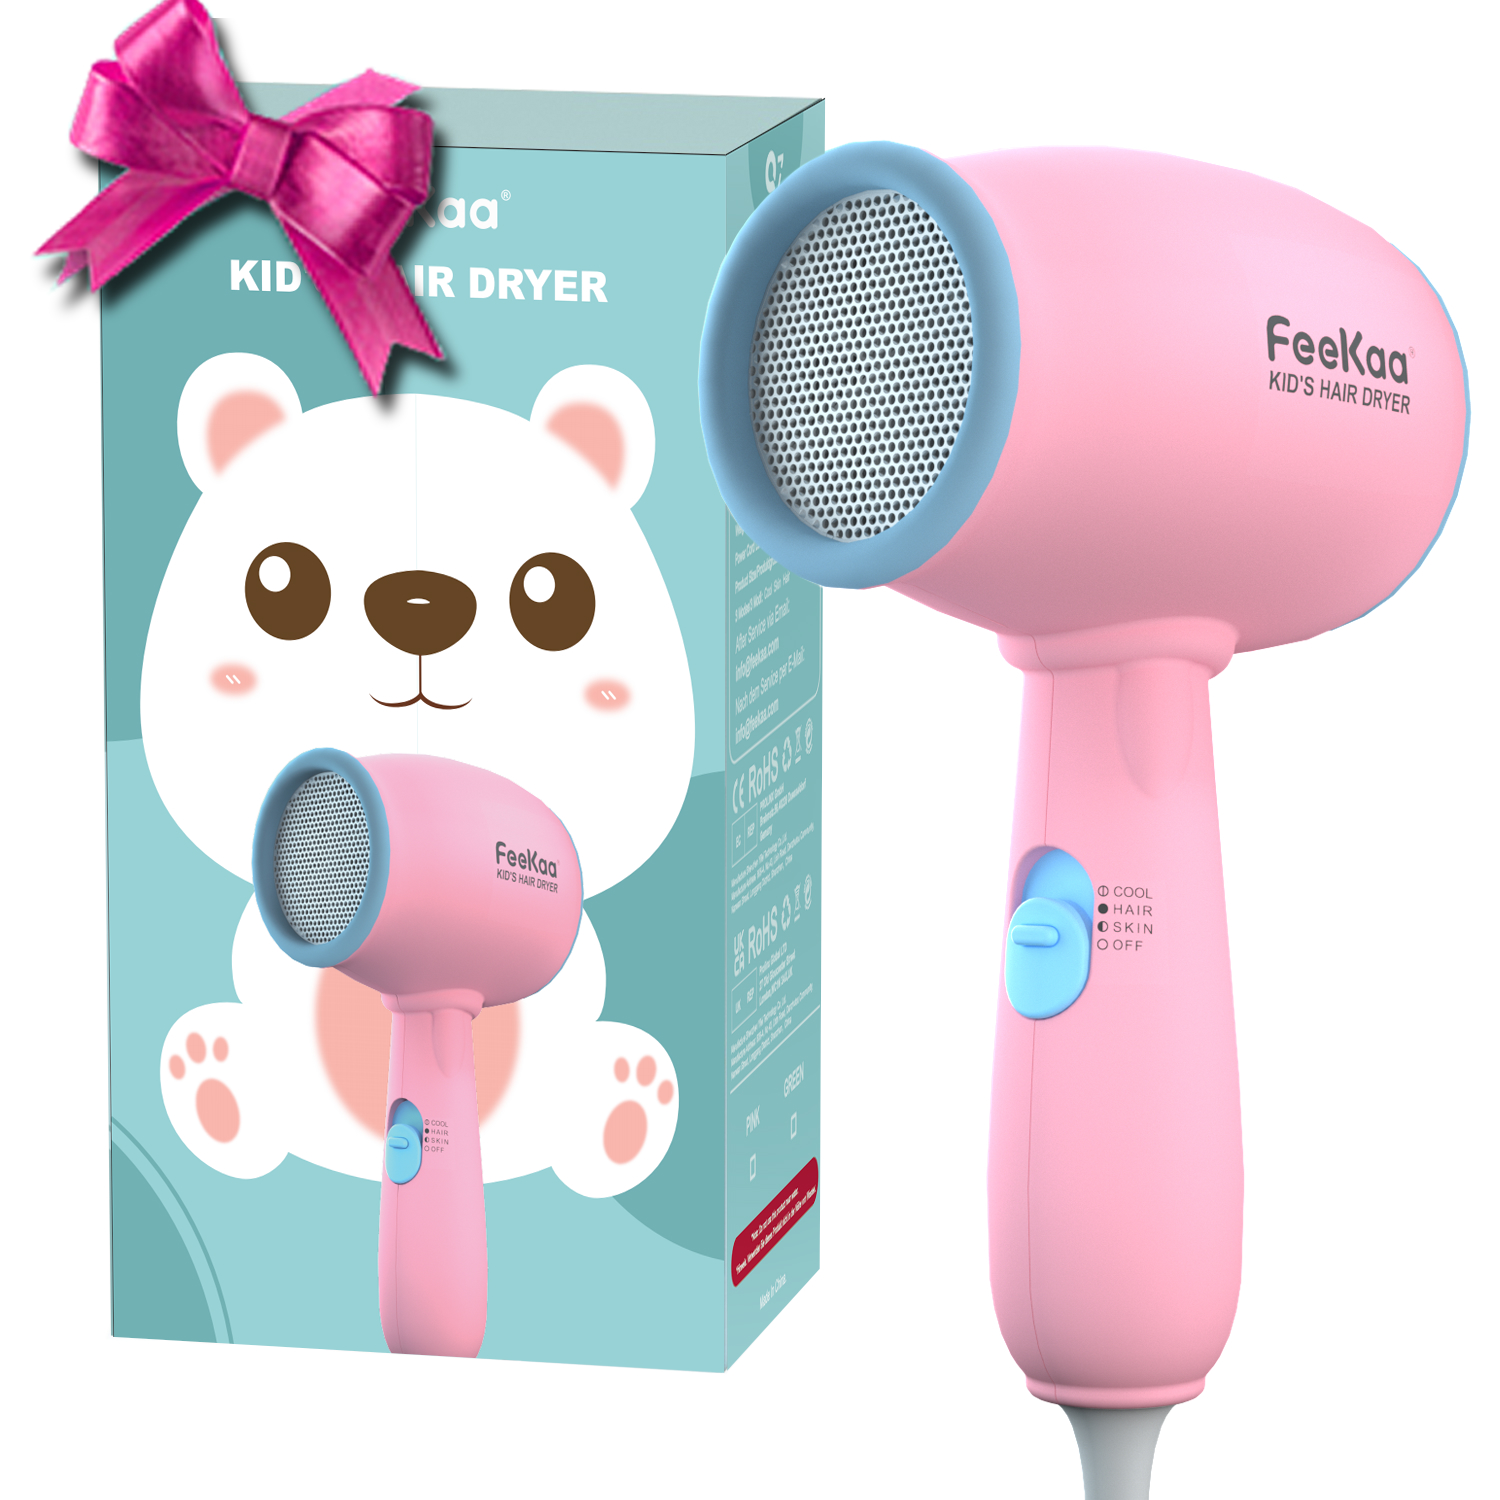 Kids Hair Dryer, FeeKaa Kids Blow Dryer for Girls, Baby Hair Dryer, Low Noise Gentle Heat for Baby Skin, Gift for Children's Birthday, Christmas Gift for Kids, Baby Shower, Pink